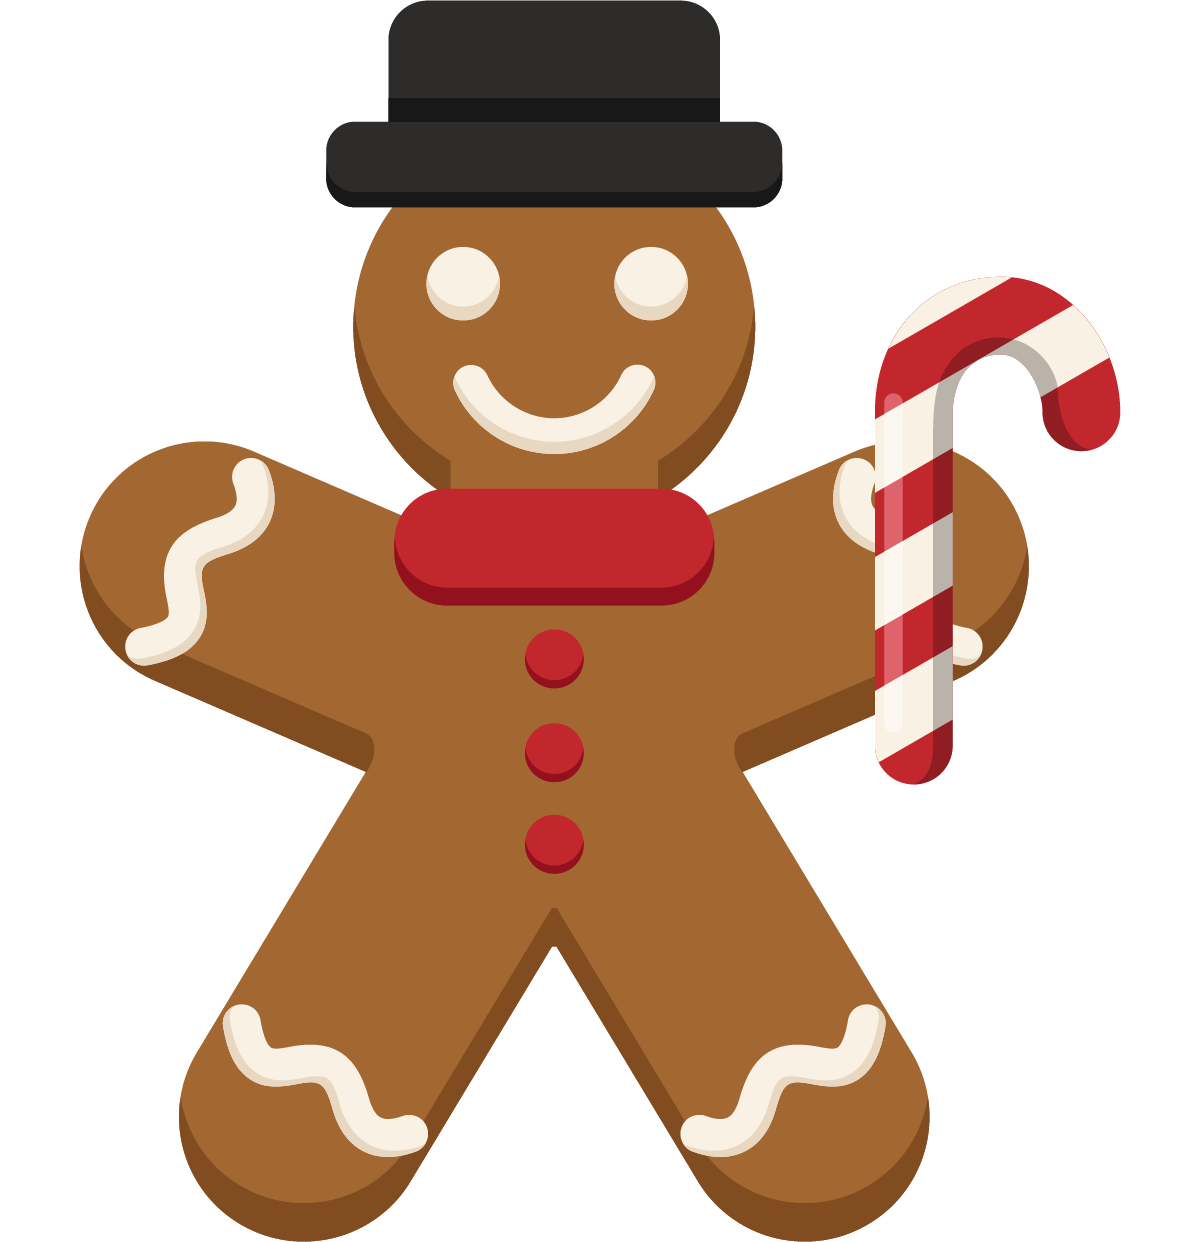 The Gingerbread Man Christmas Day Image - gingerbread man png download ...